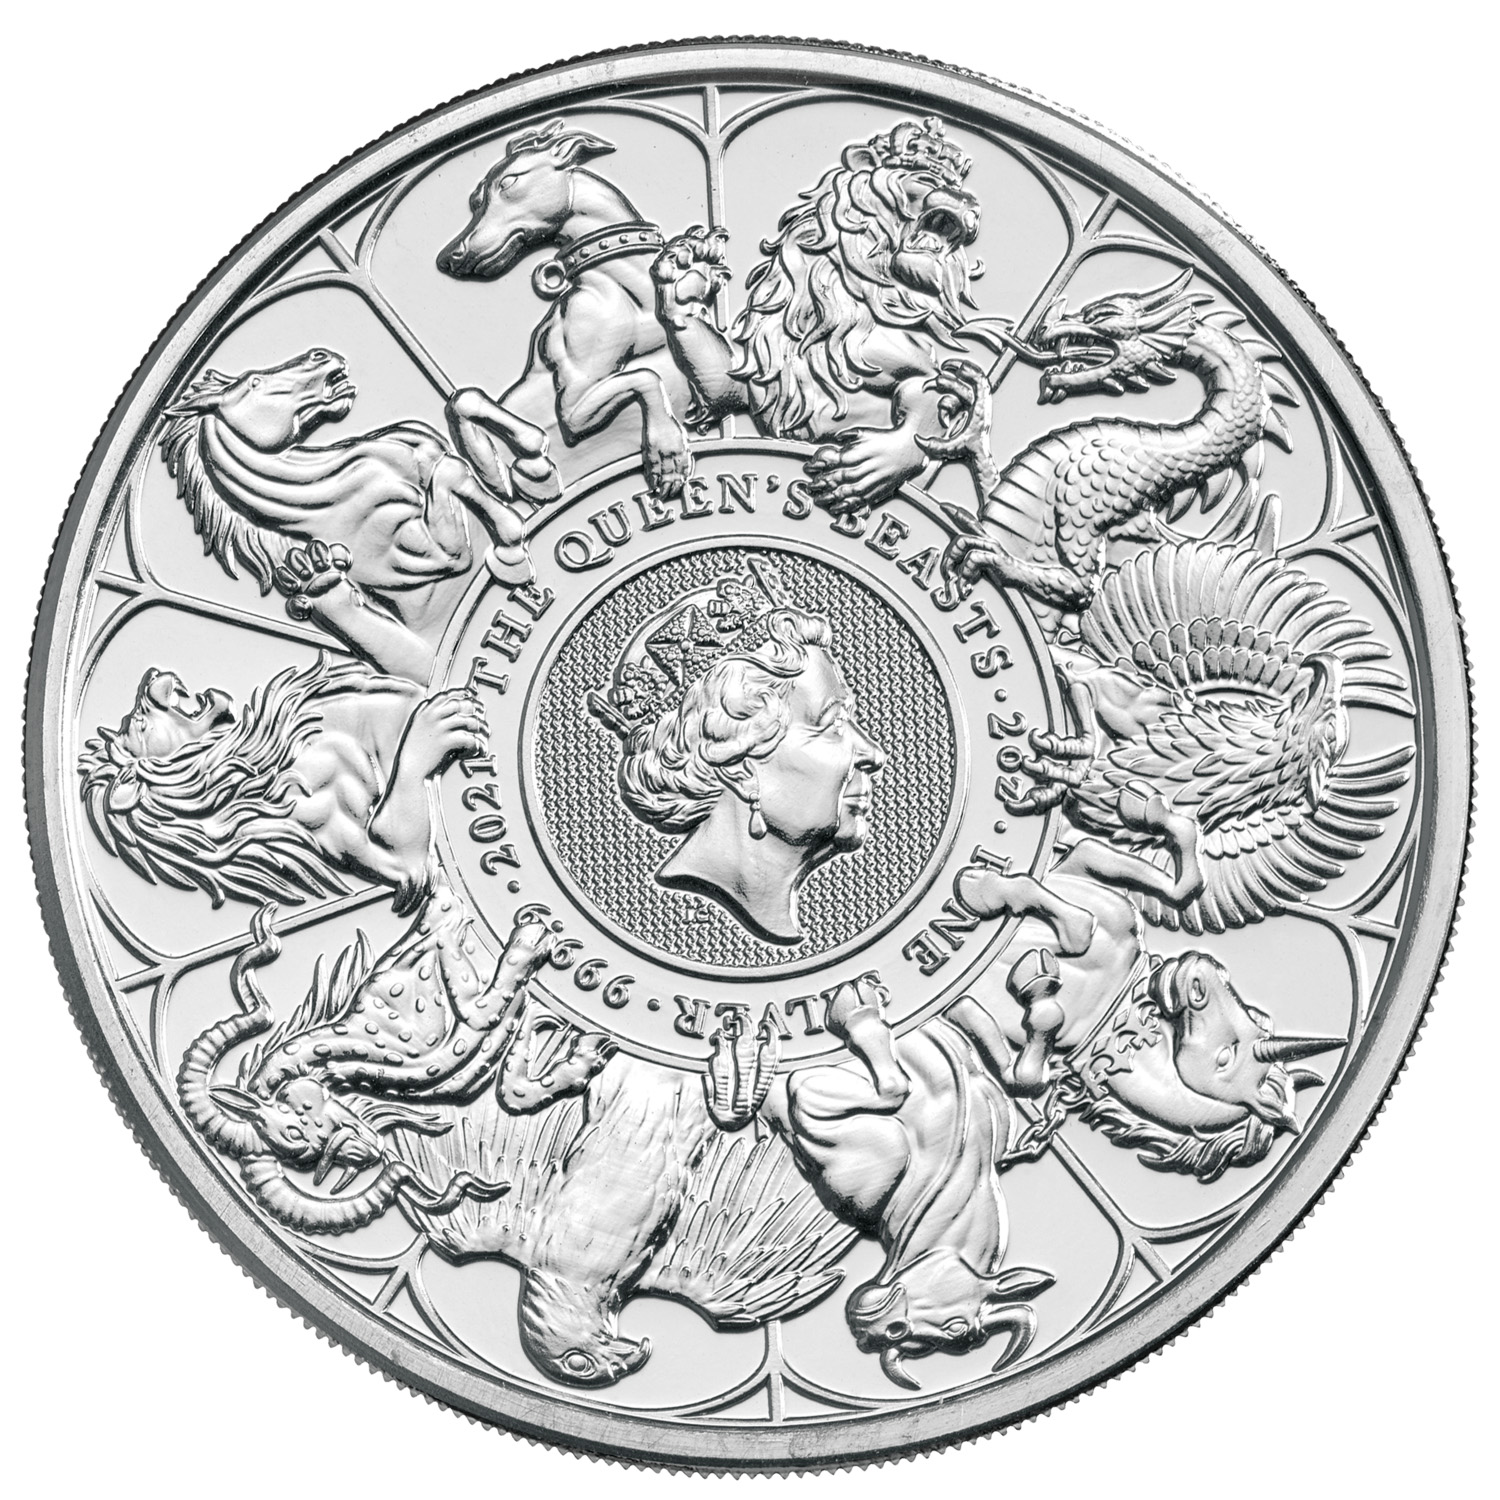 Queen's Beasts Completer Coin 2 oz Silber 2021